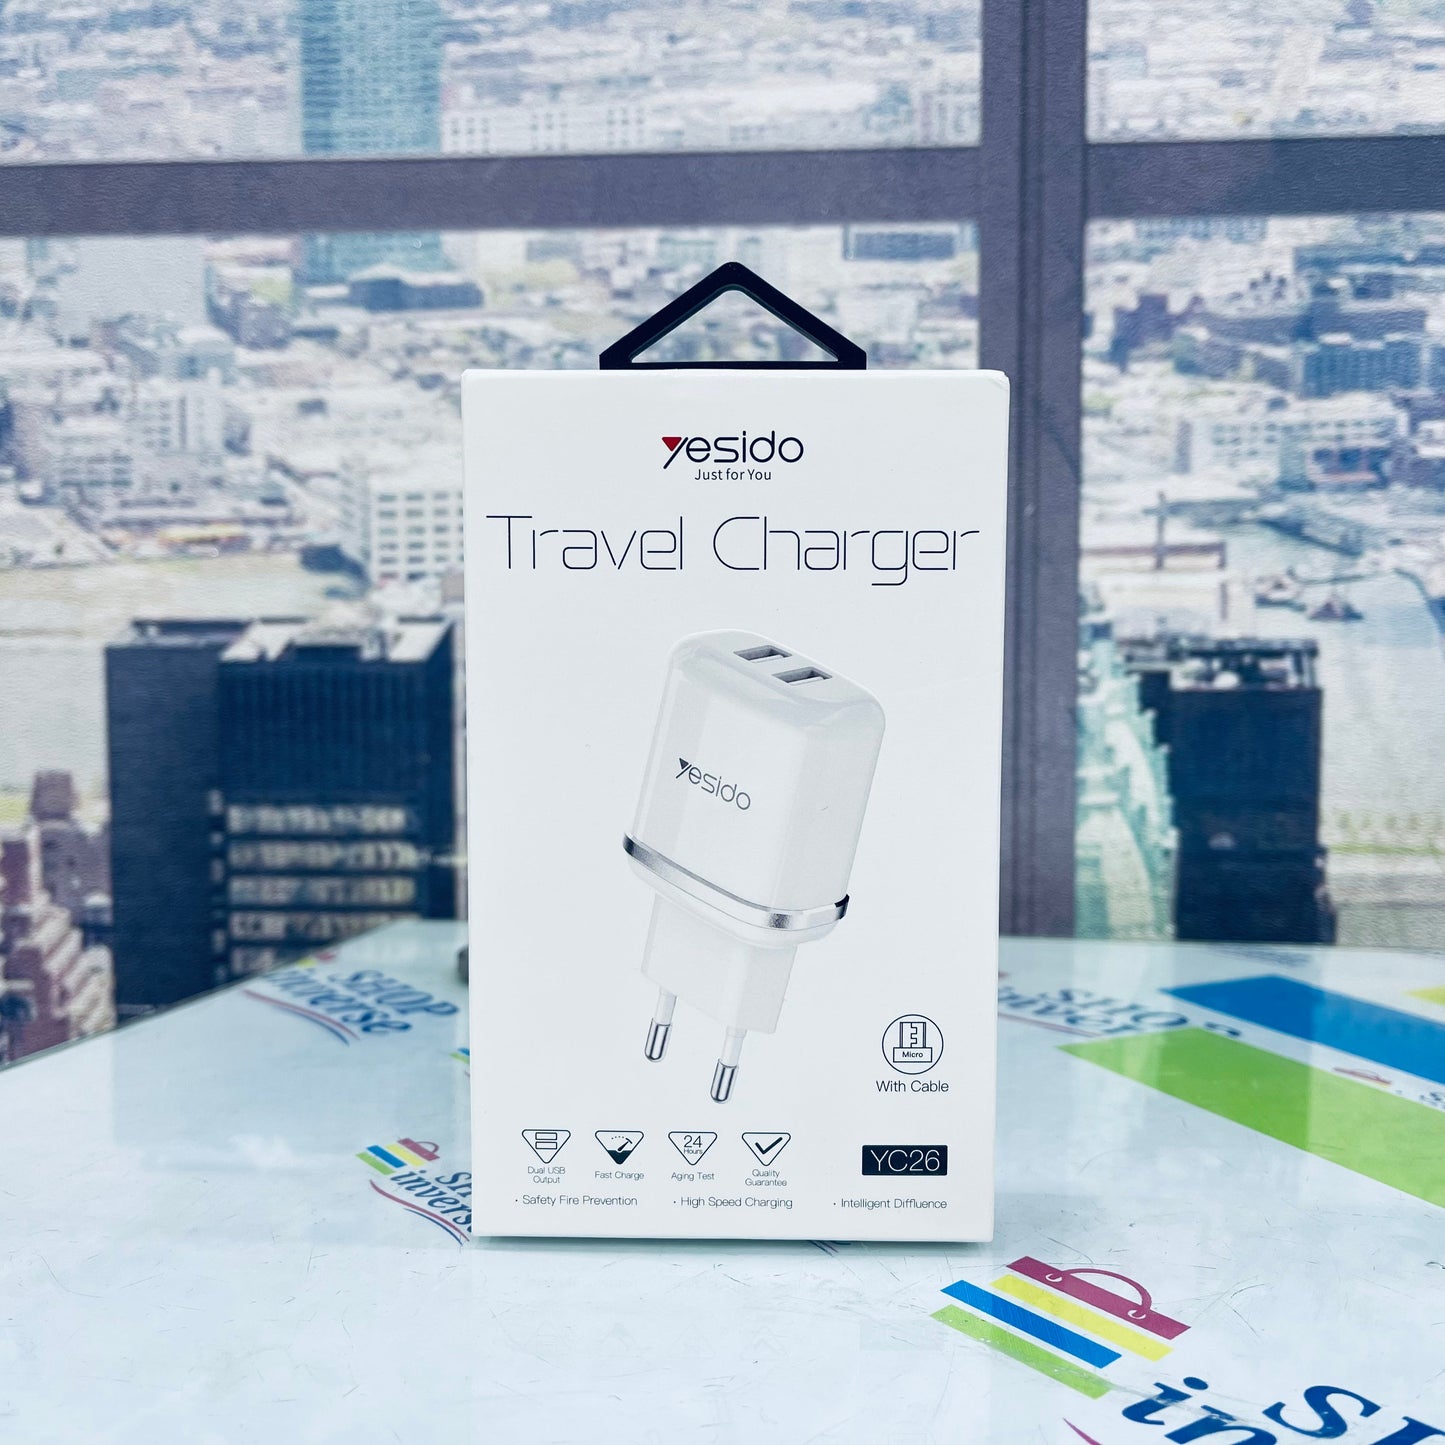 Yesido YC26 Dual USB Travel Charger SHOPINVERSE